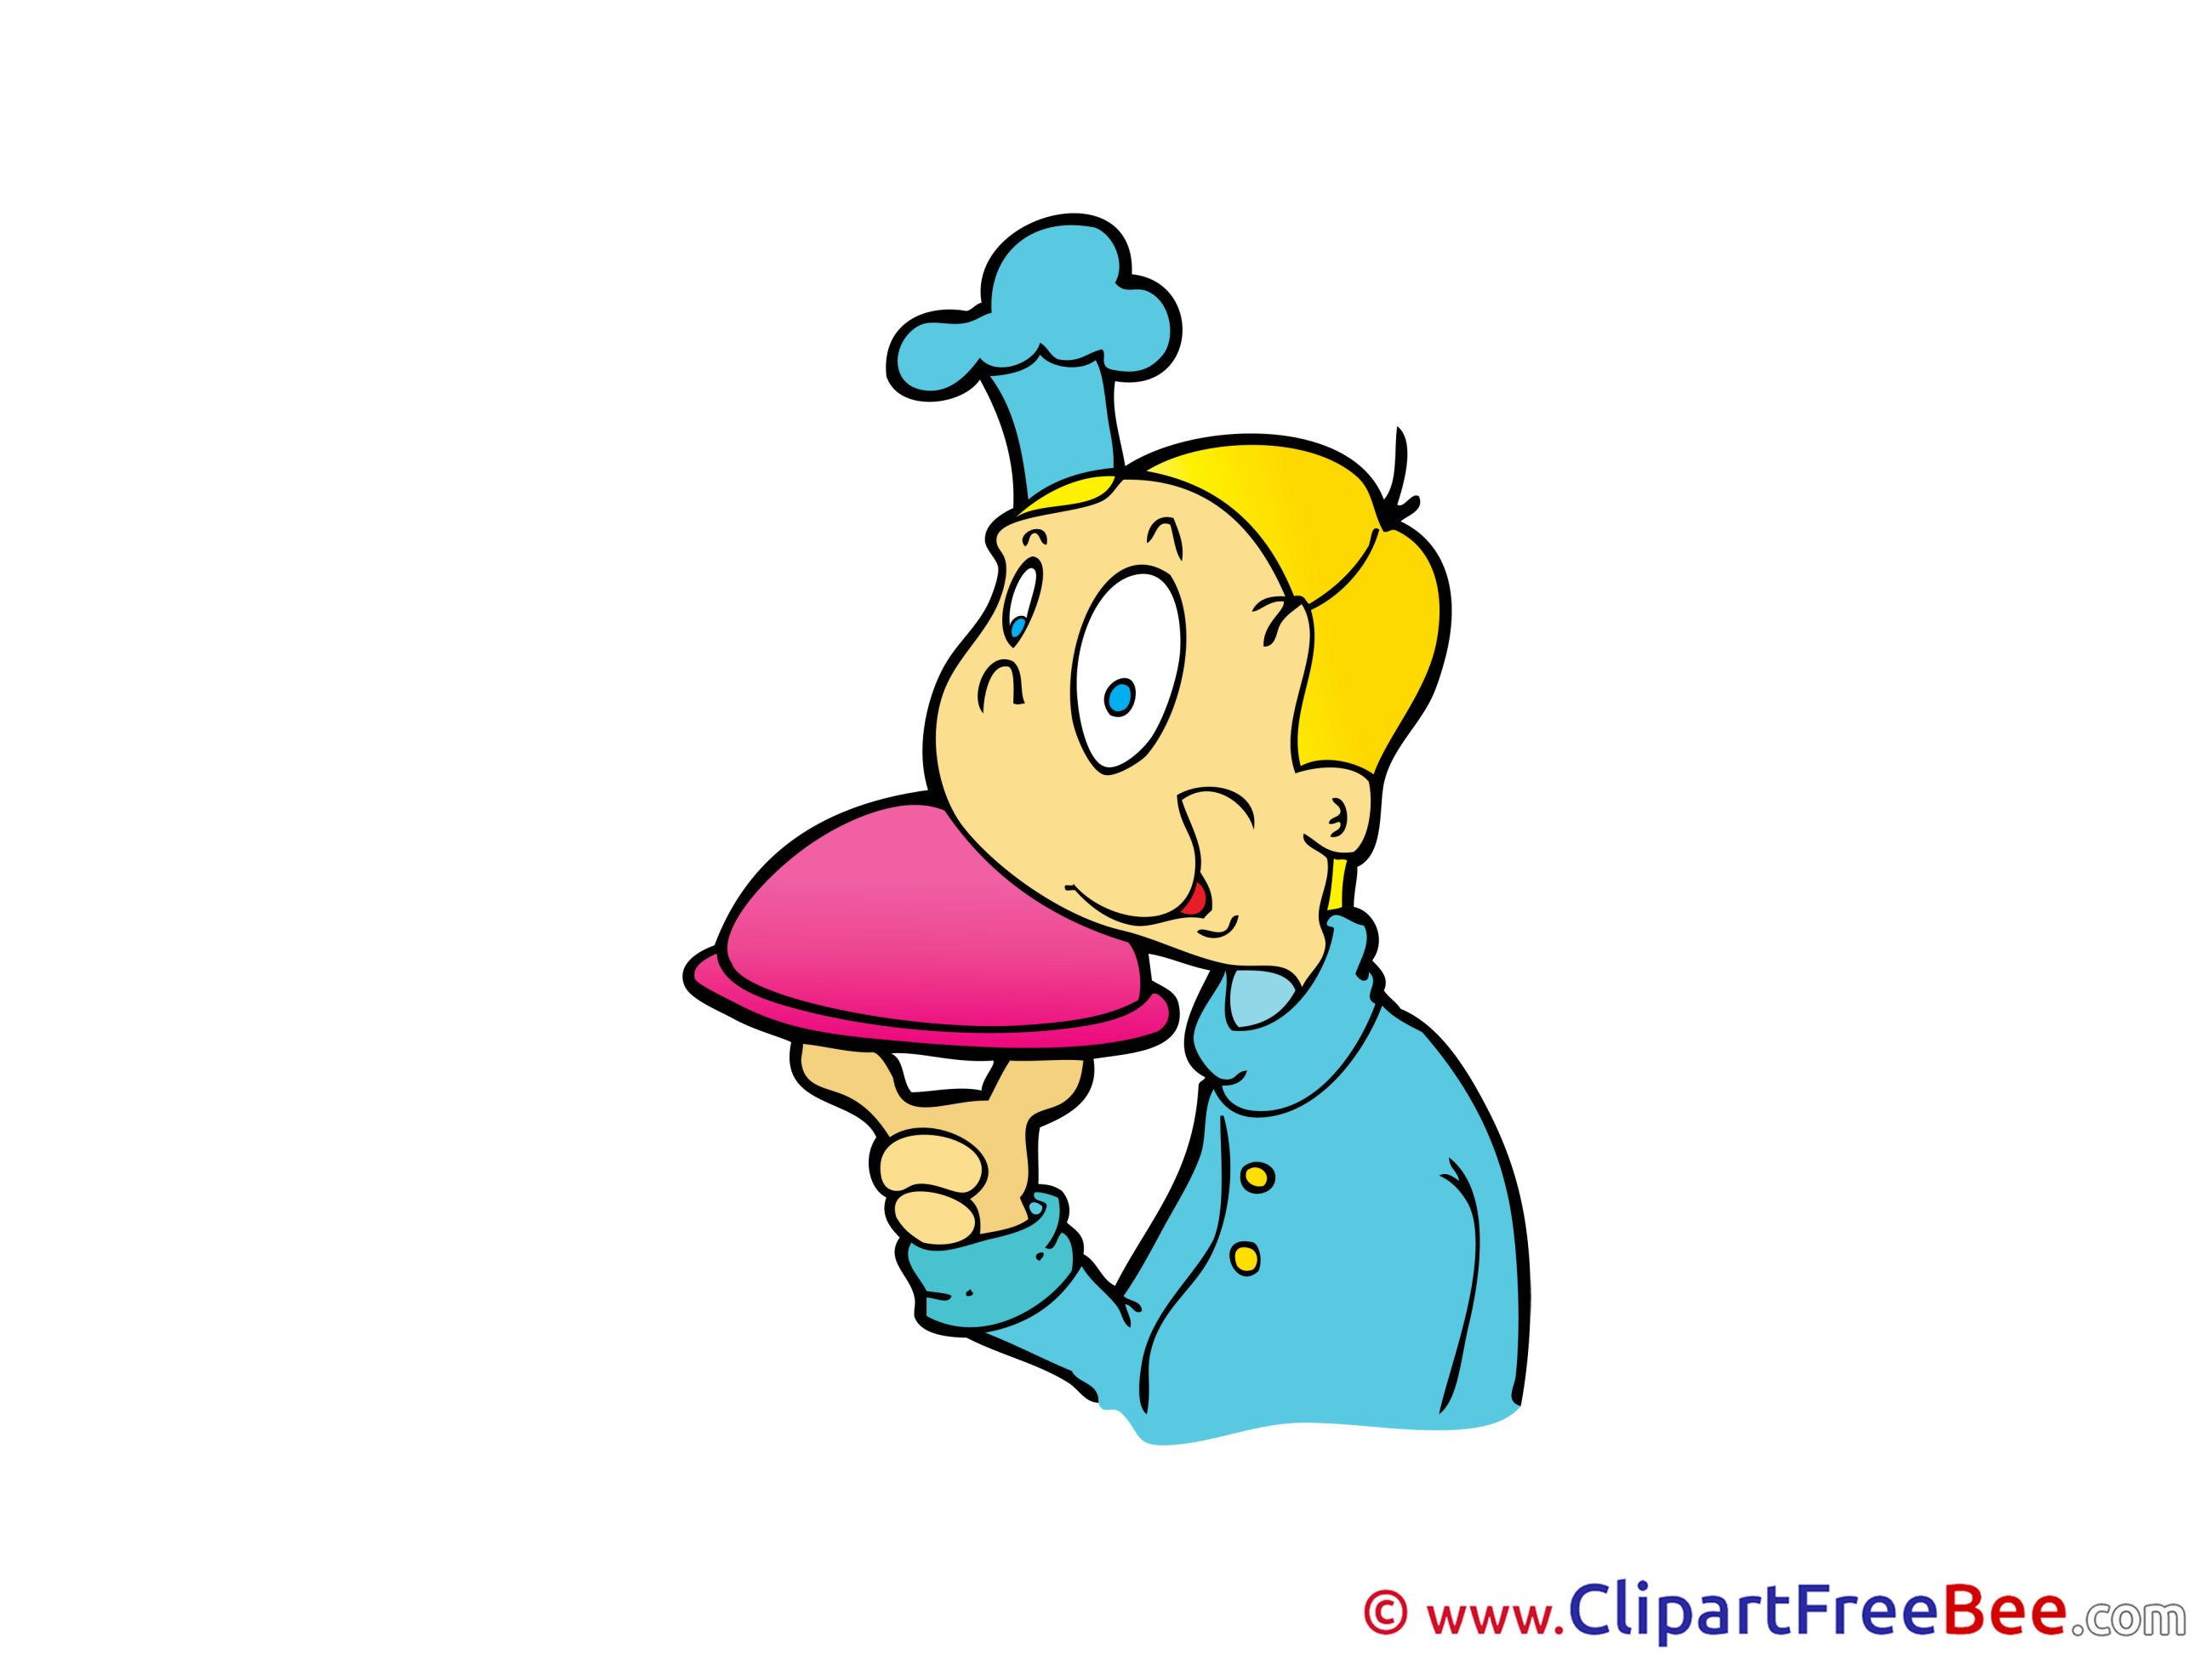 Waiter free Cliparts for download